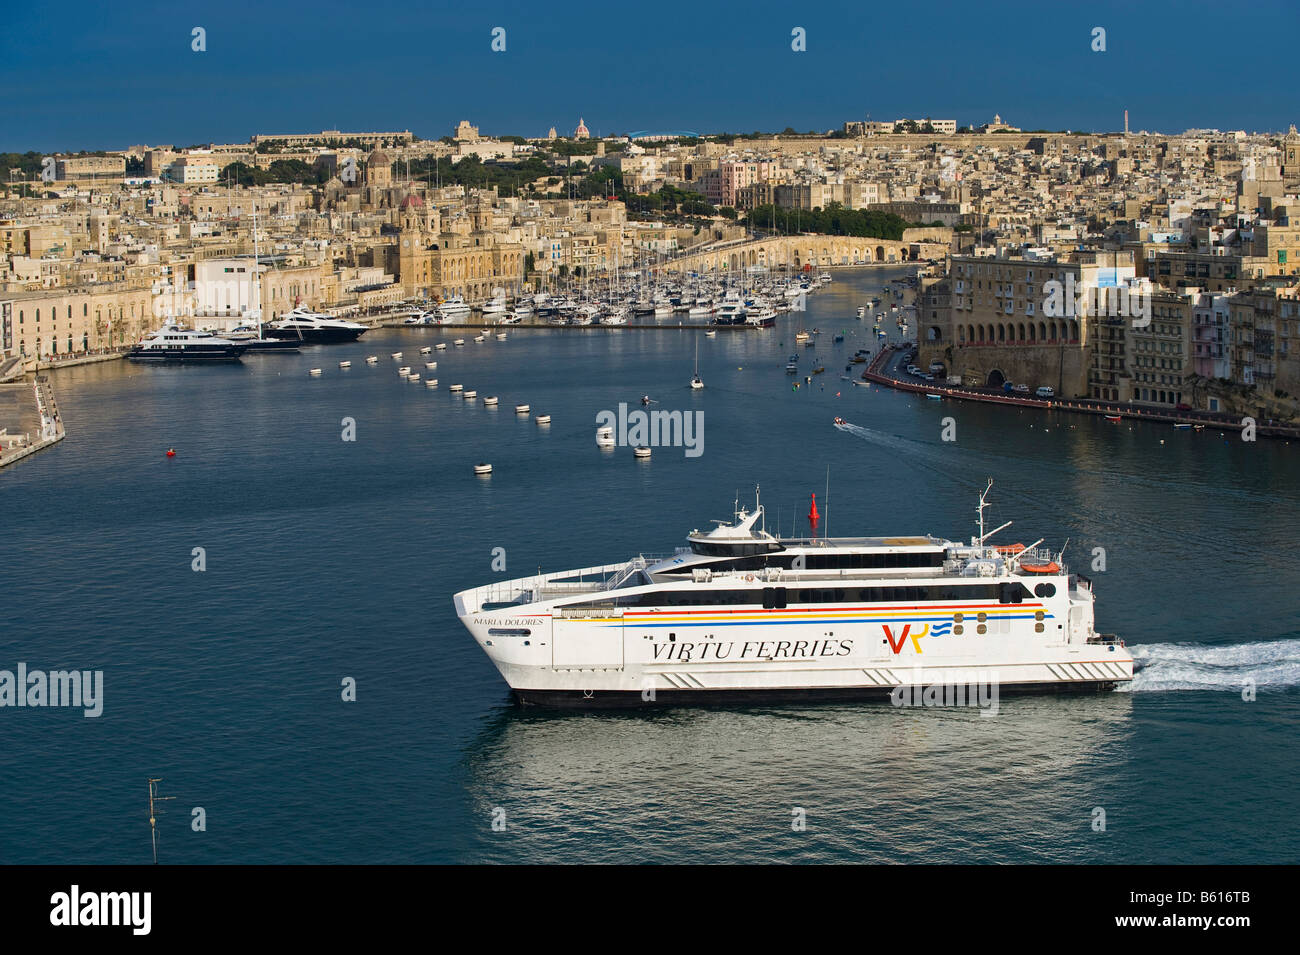 The Three Cities, Vittoriosa with Fort San Angelo and a ferry from Sicily, from La Valletta with Grand Harbour, Malta, Europe Stock Photo